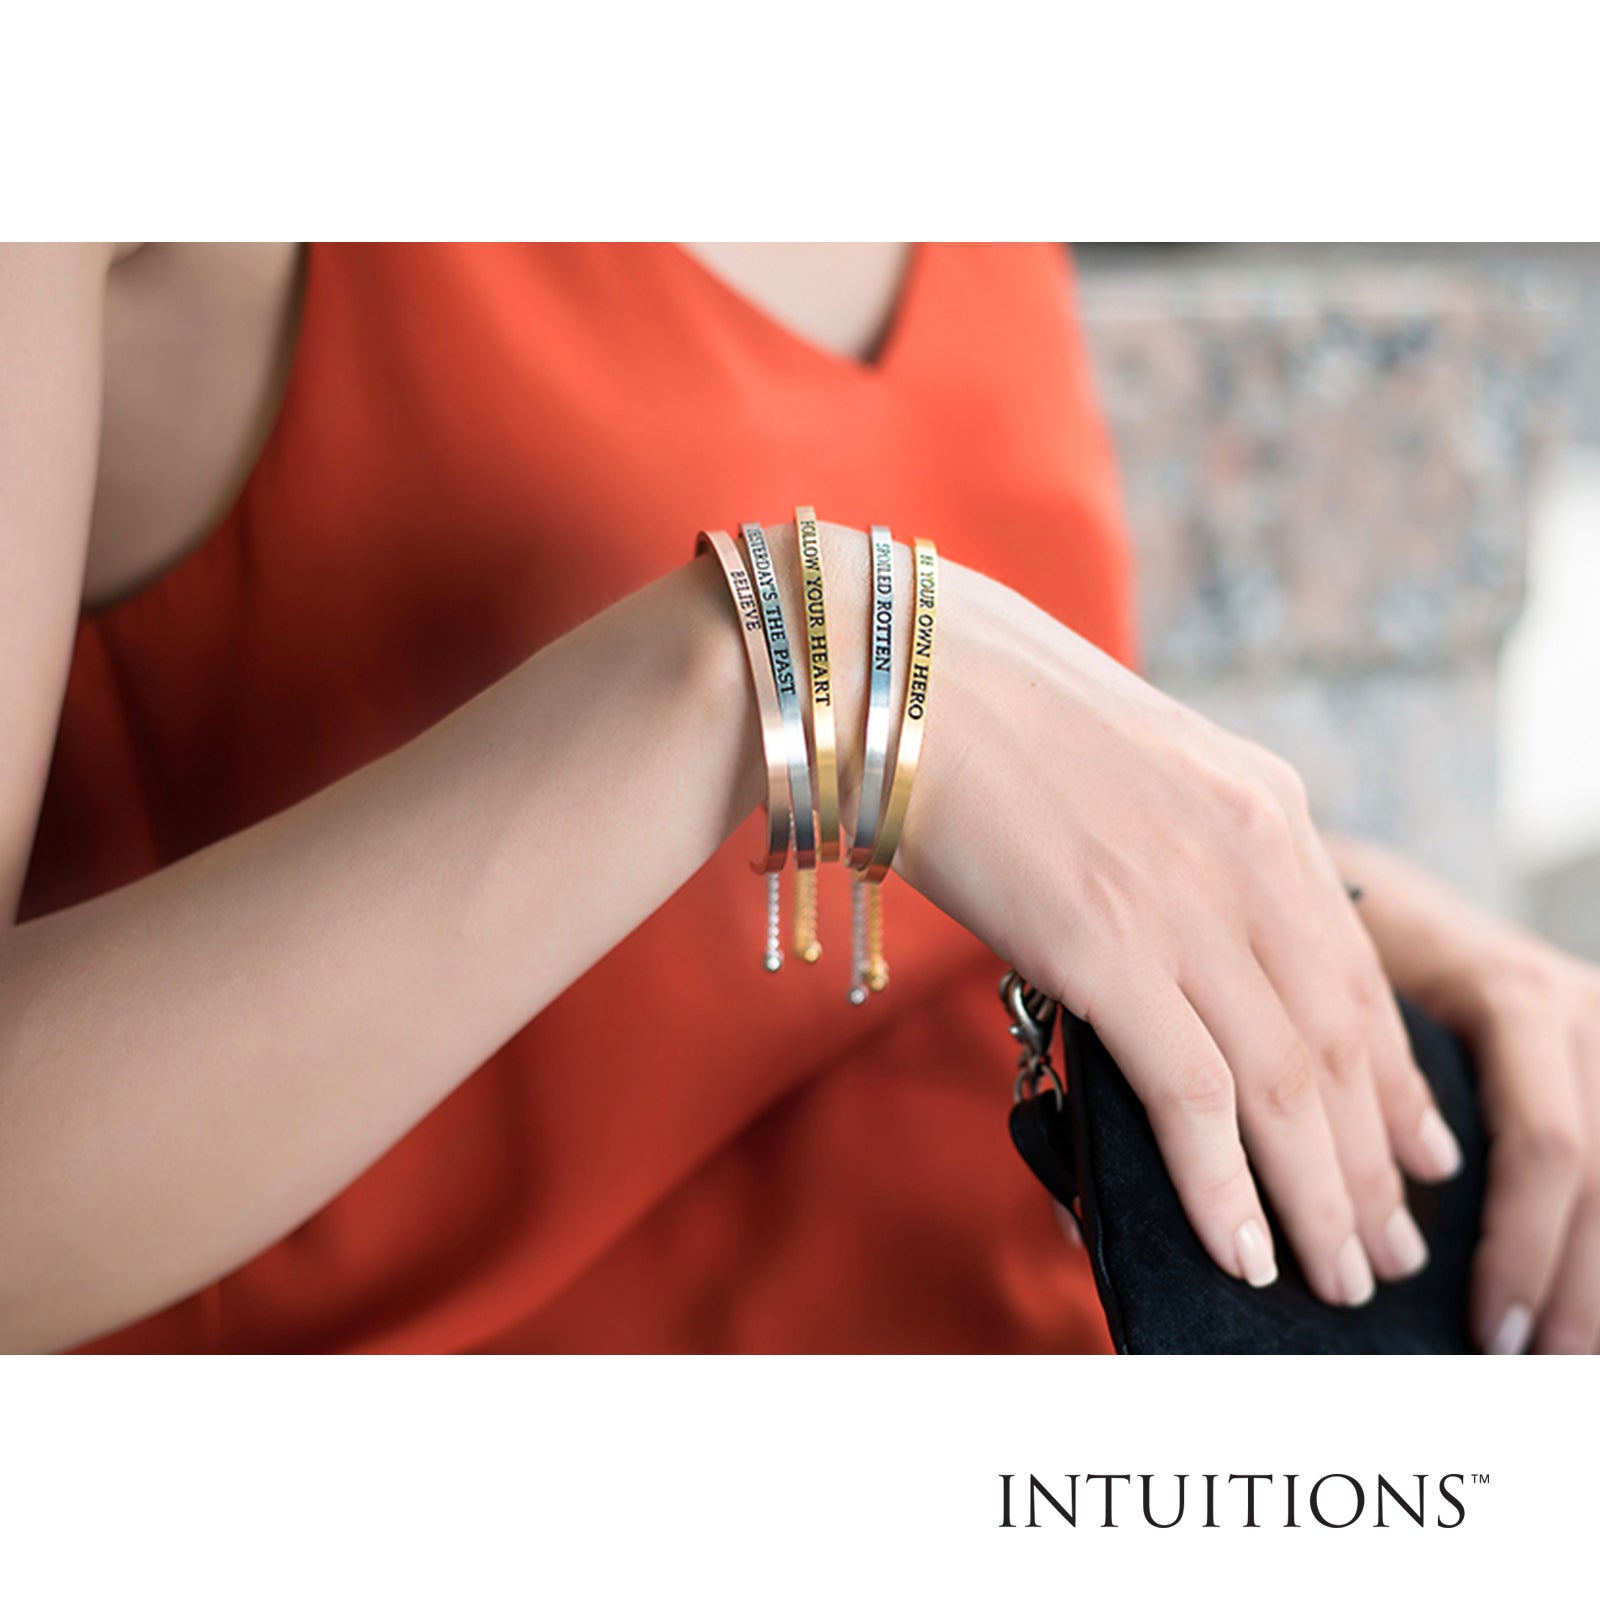 Intuitions Stainless Steel LIVE LOVE LAUGH Diamond Accent Cuff Bangle Bracelet